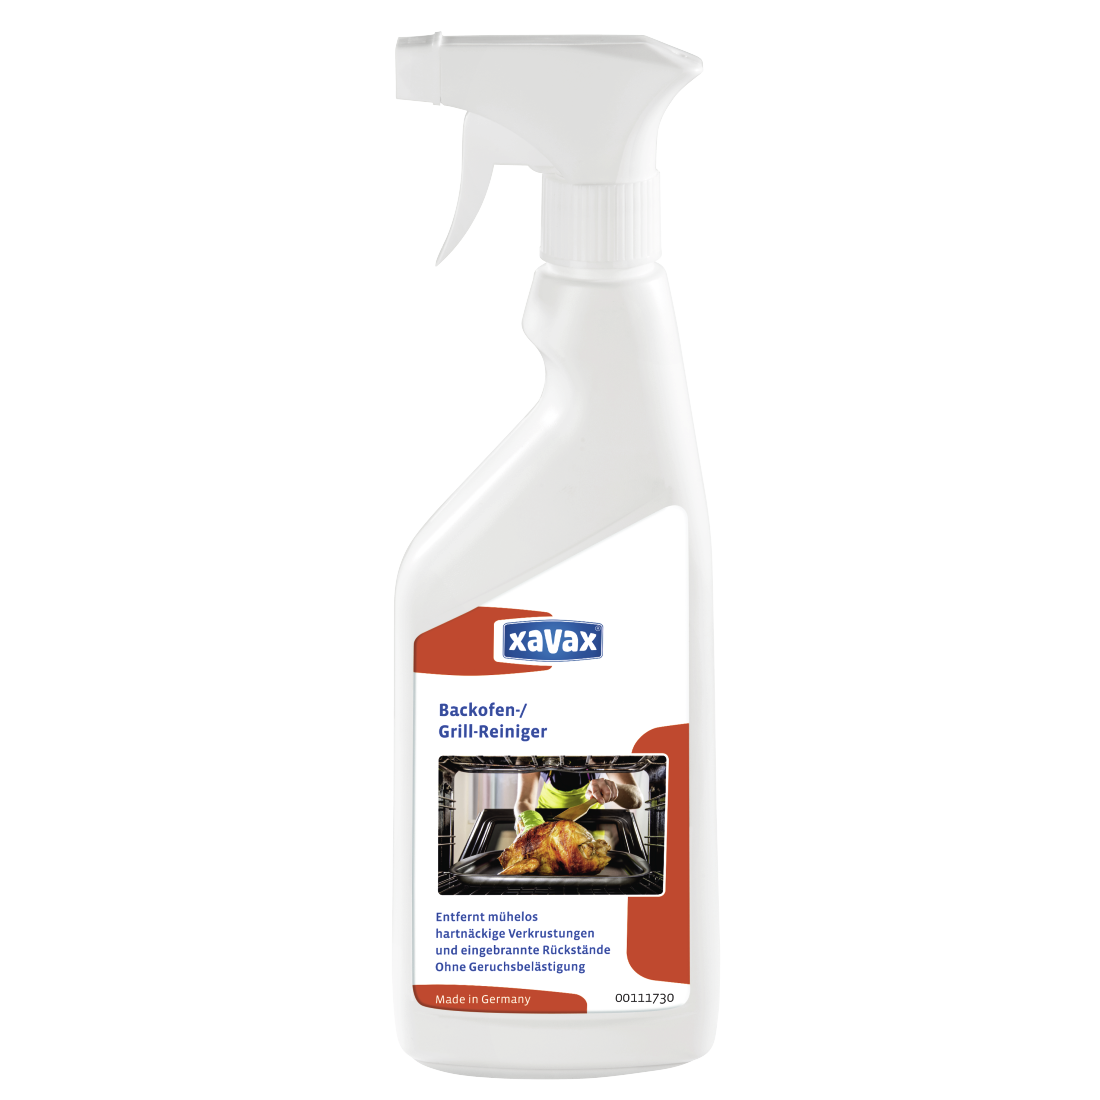 abx High-Res Image - Xavax, Nettoyant pour four/grill, 500 ml